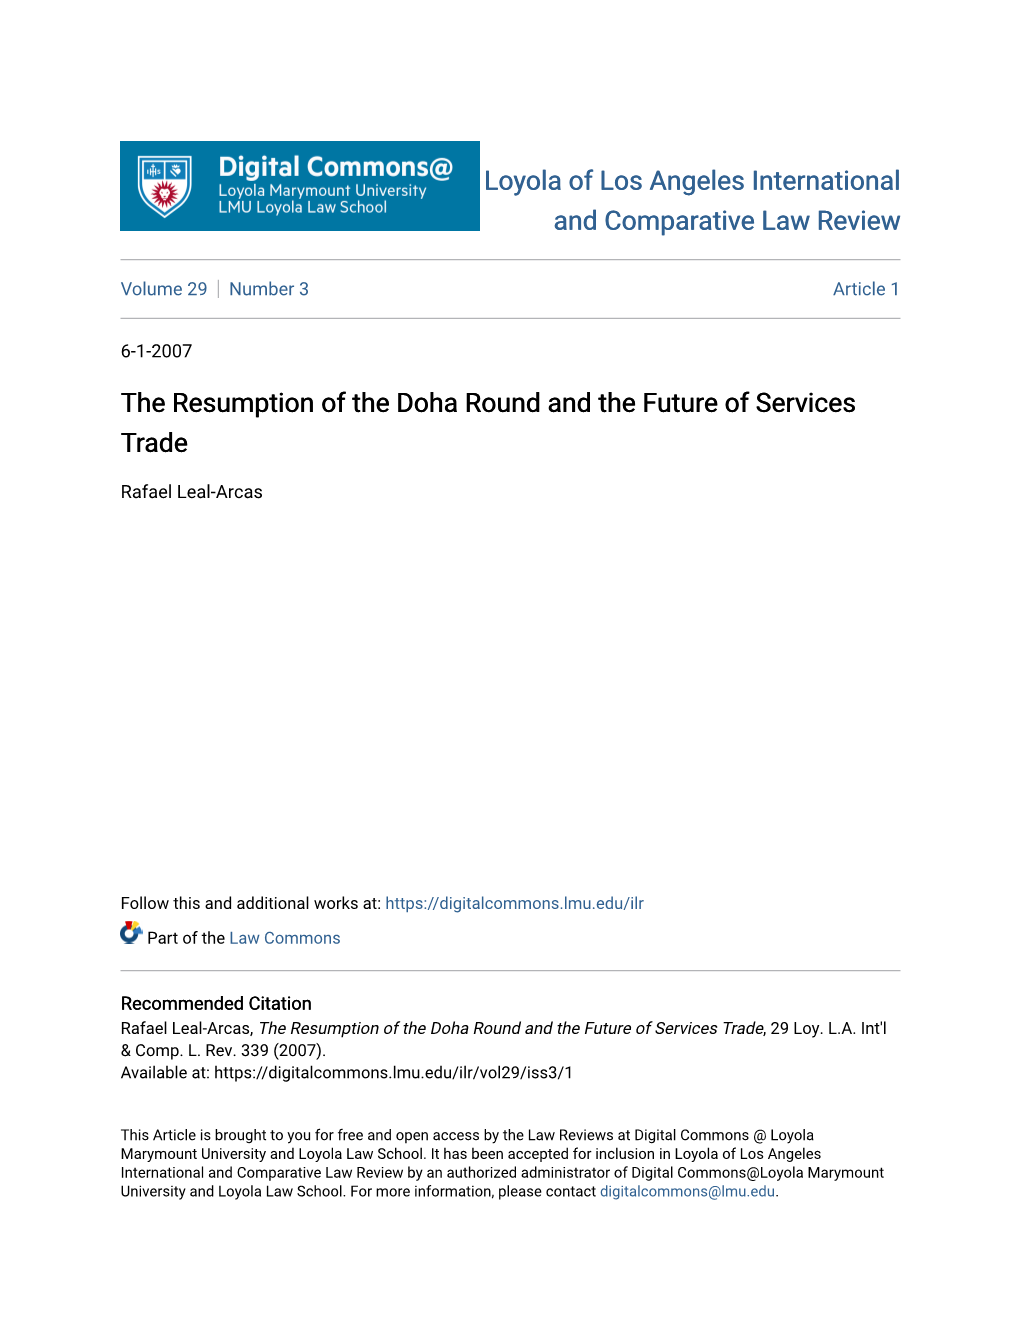 The Resumption of the Doha Round and the Future of Services Trade